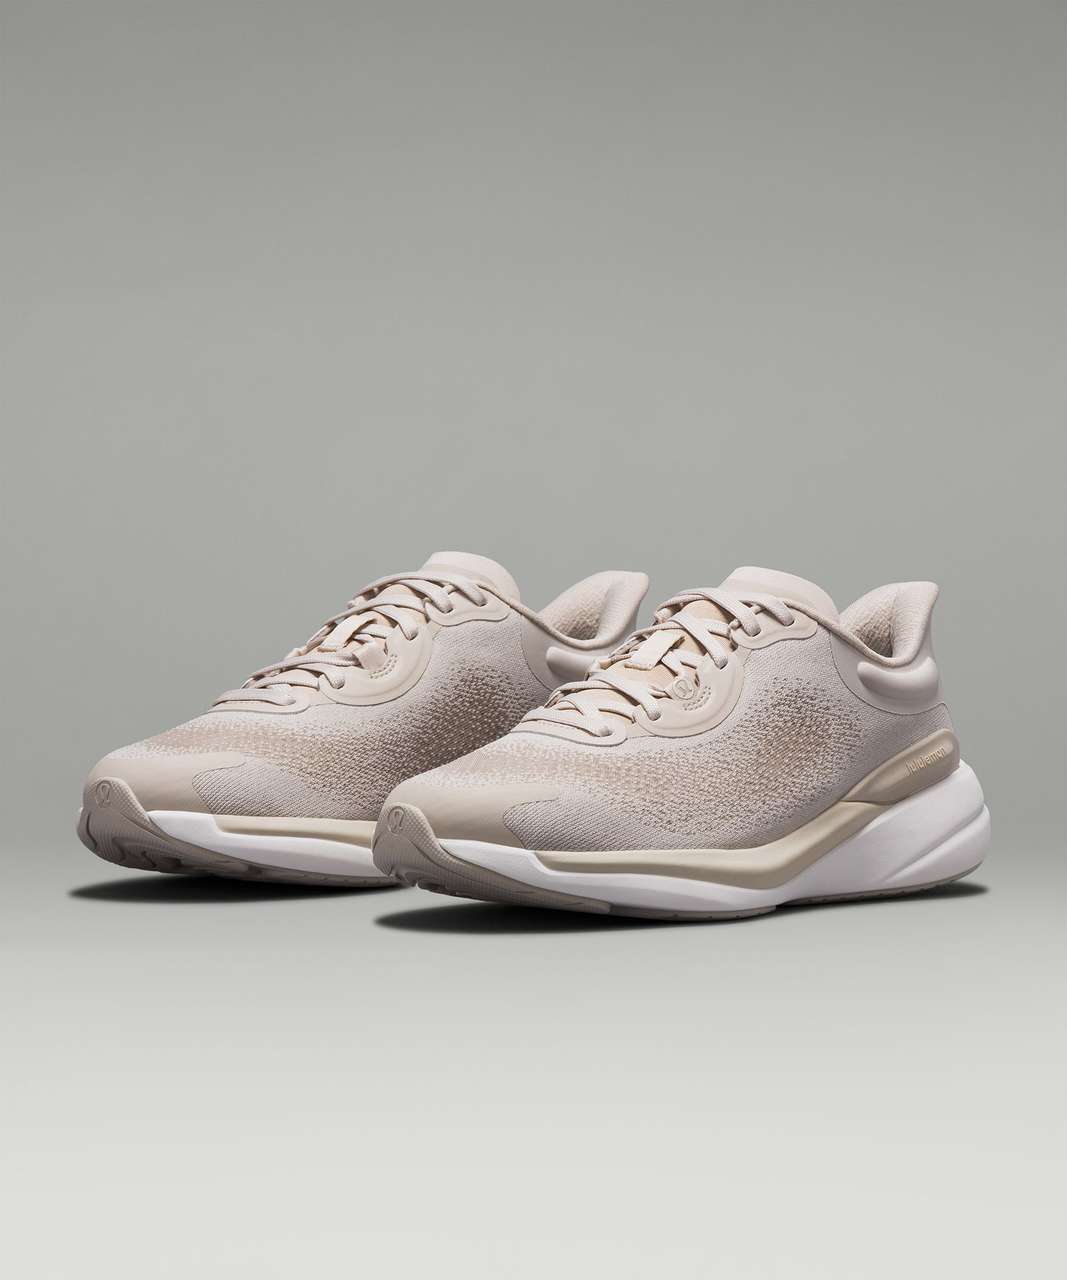 Lululemon Chargefeel 2 Low Womens Workout Shoe - Baked Clay / Baked Clay / White